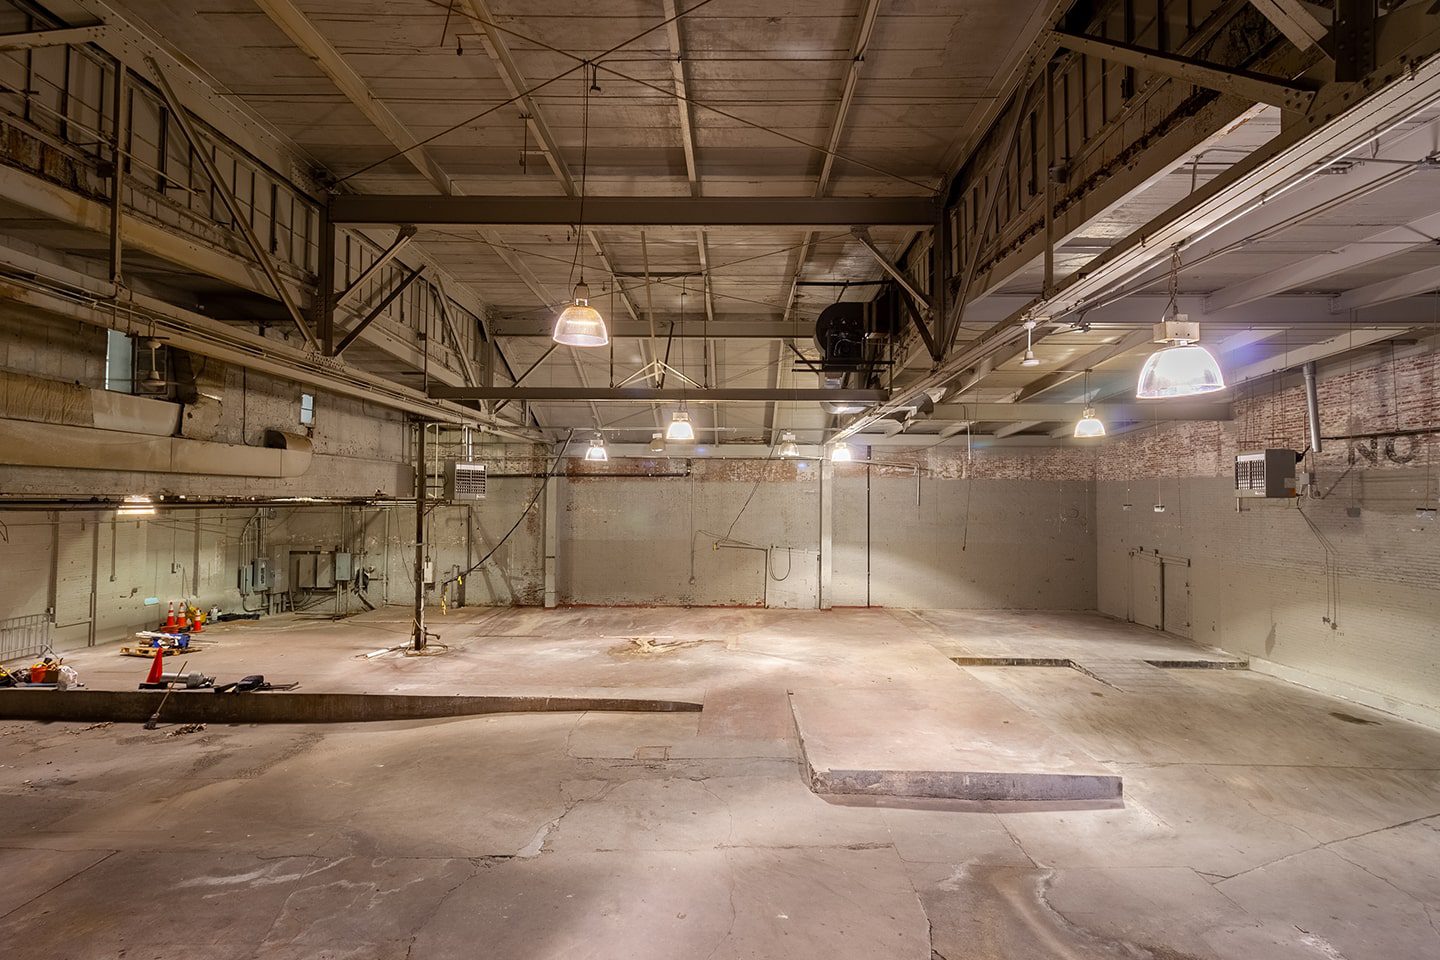 A large room with concrete floors and walls.